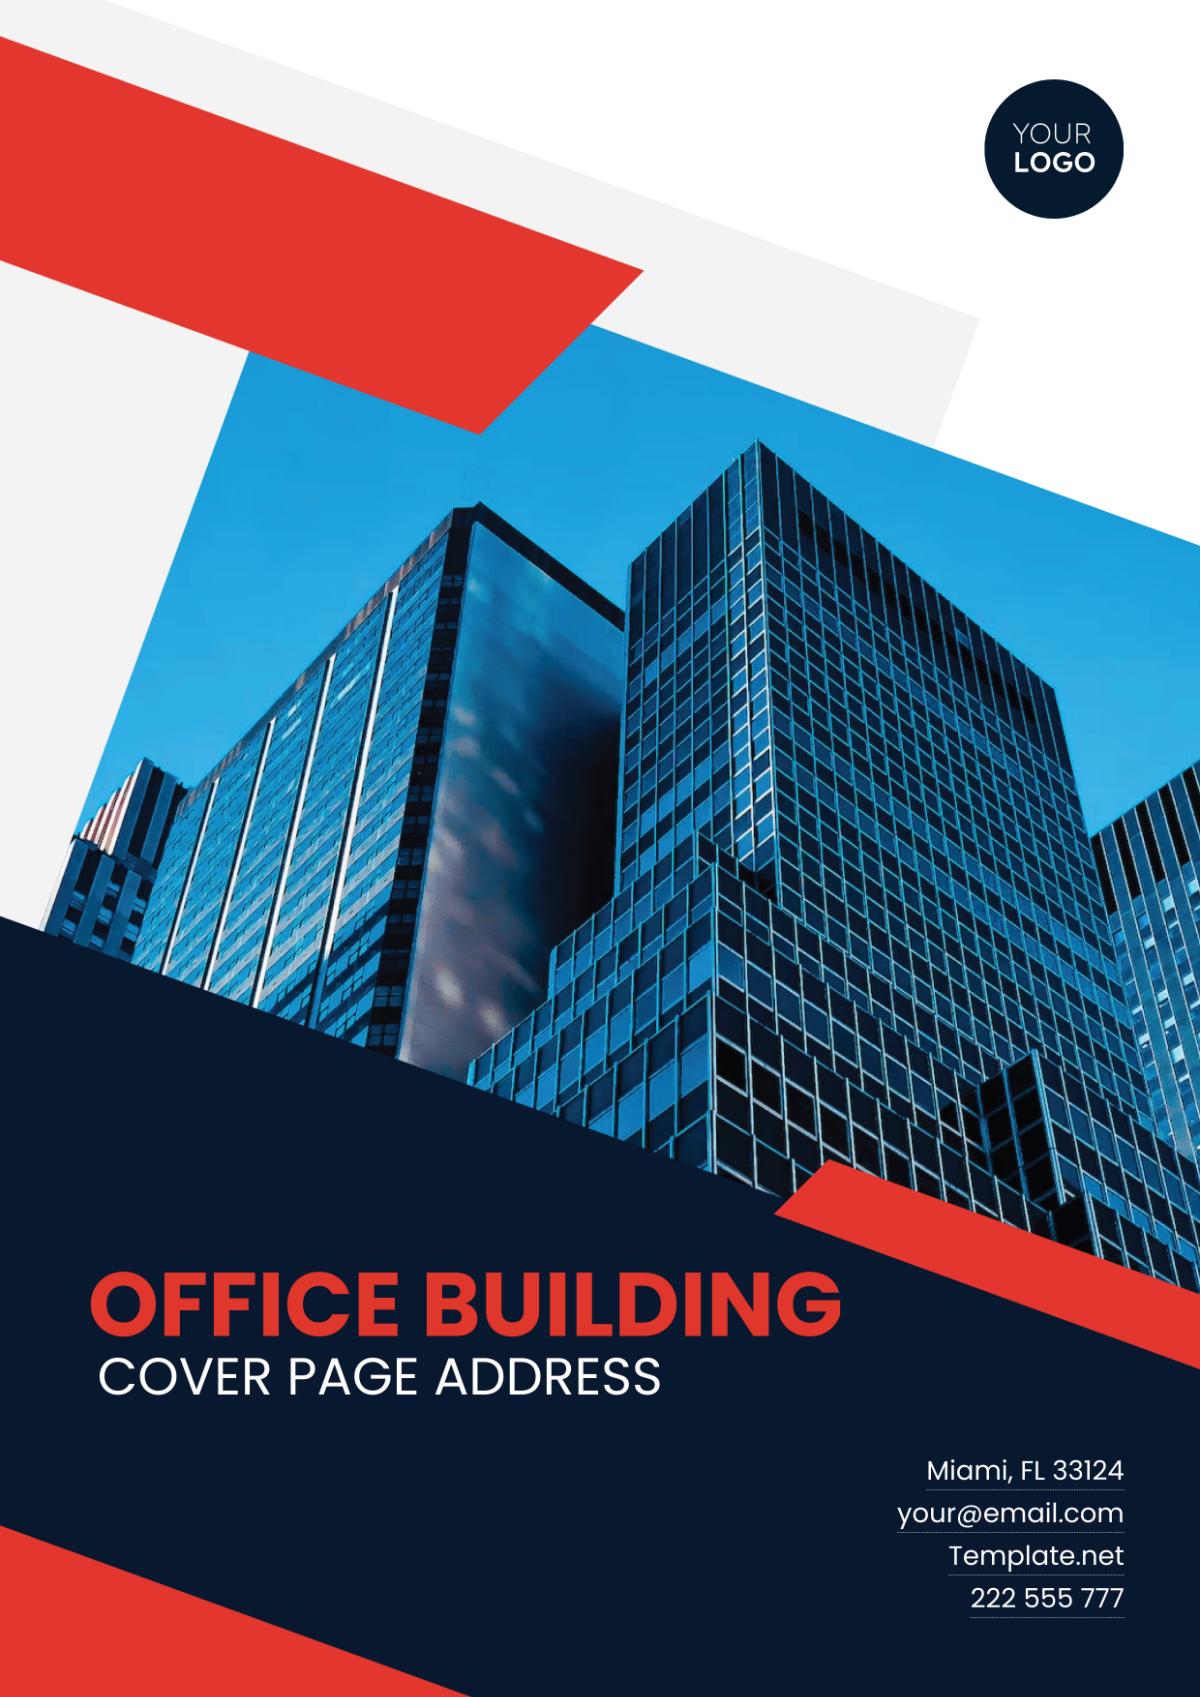 Office Building Cover Page Address